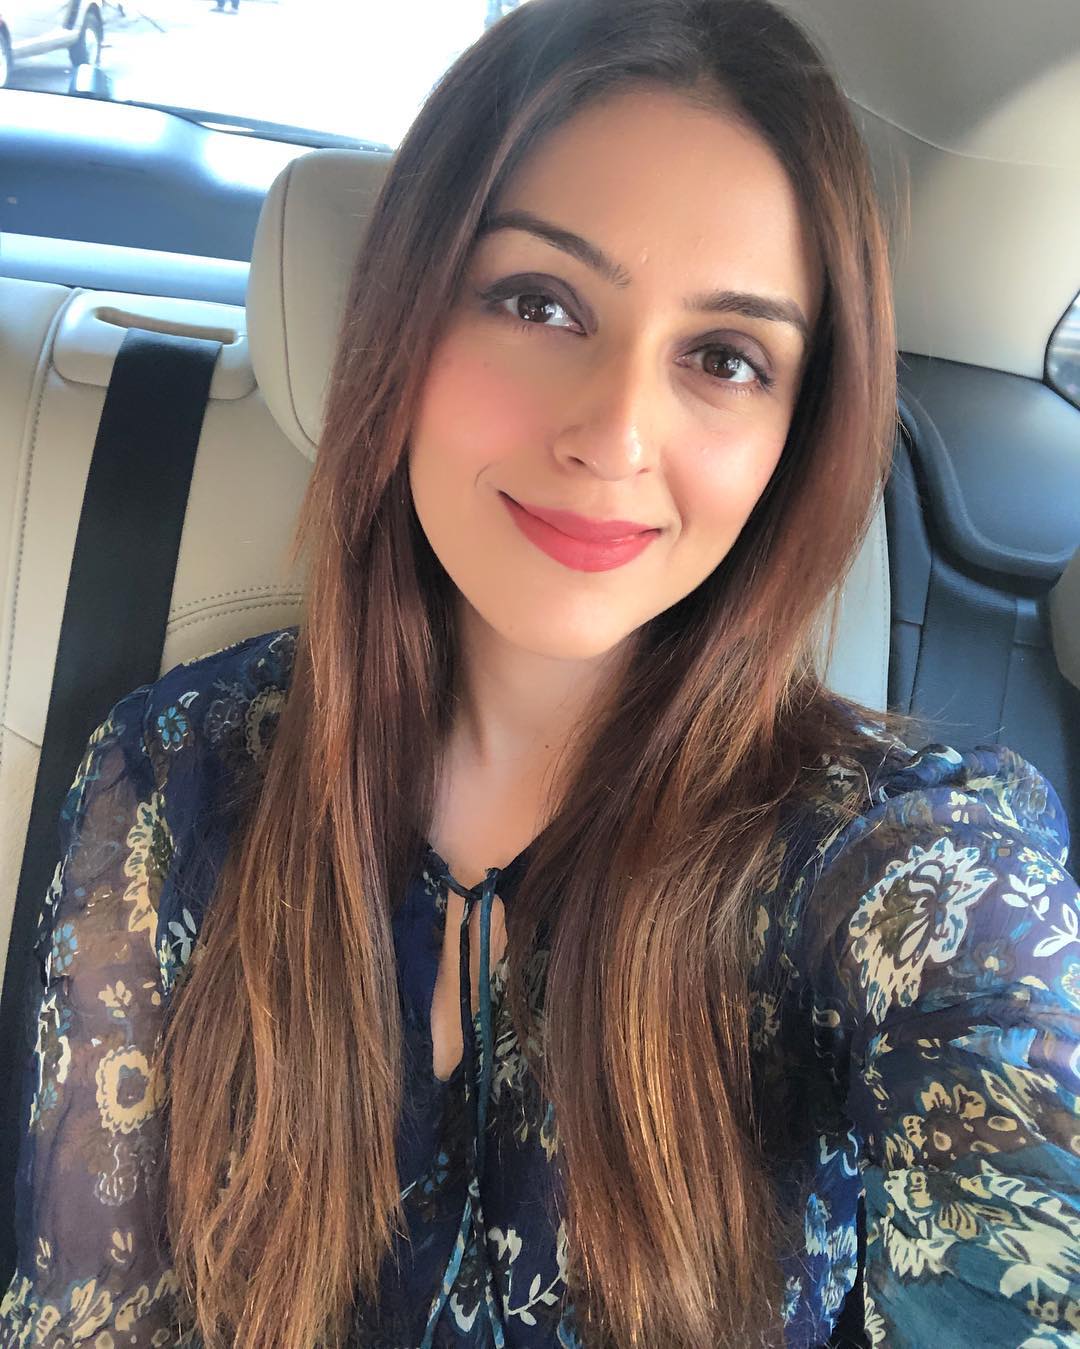 Aarti Chabria Bollywood Actress 50 Dreampirates Contents 1 aarti chabria bio 7 aarti chabria net worth and salary information educational qualification of aarti chabria has been discussed here. aarti chabria bollywood actress 50